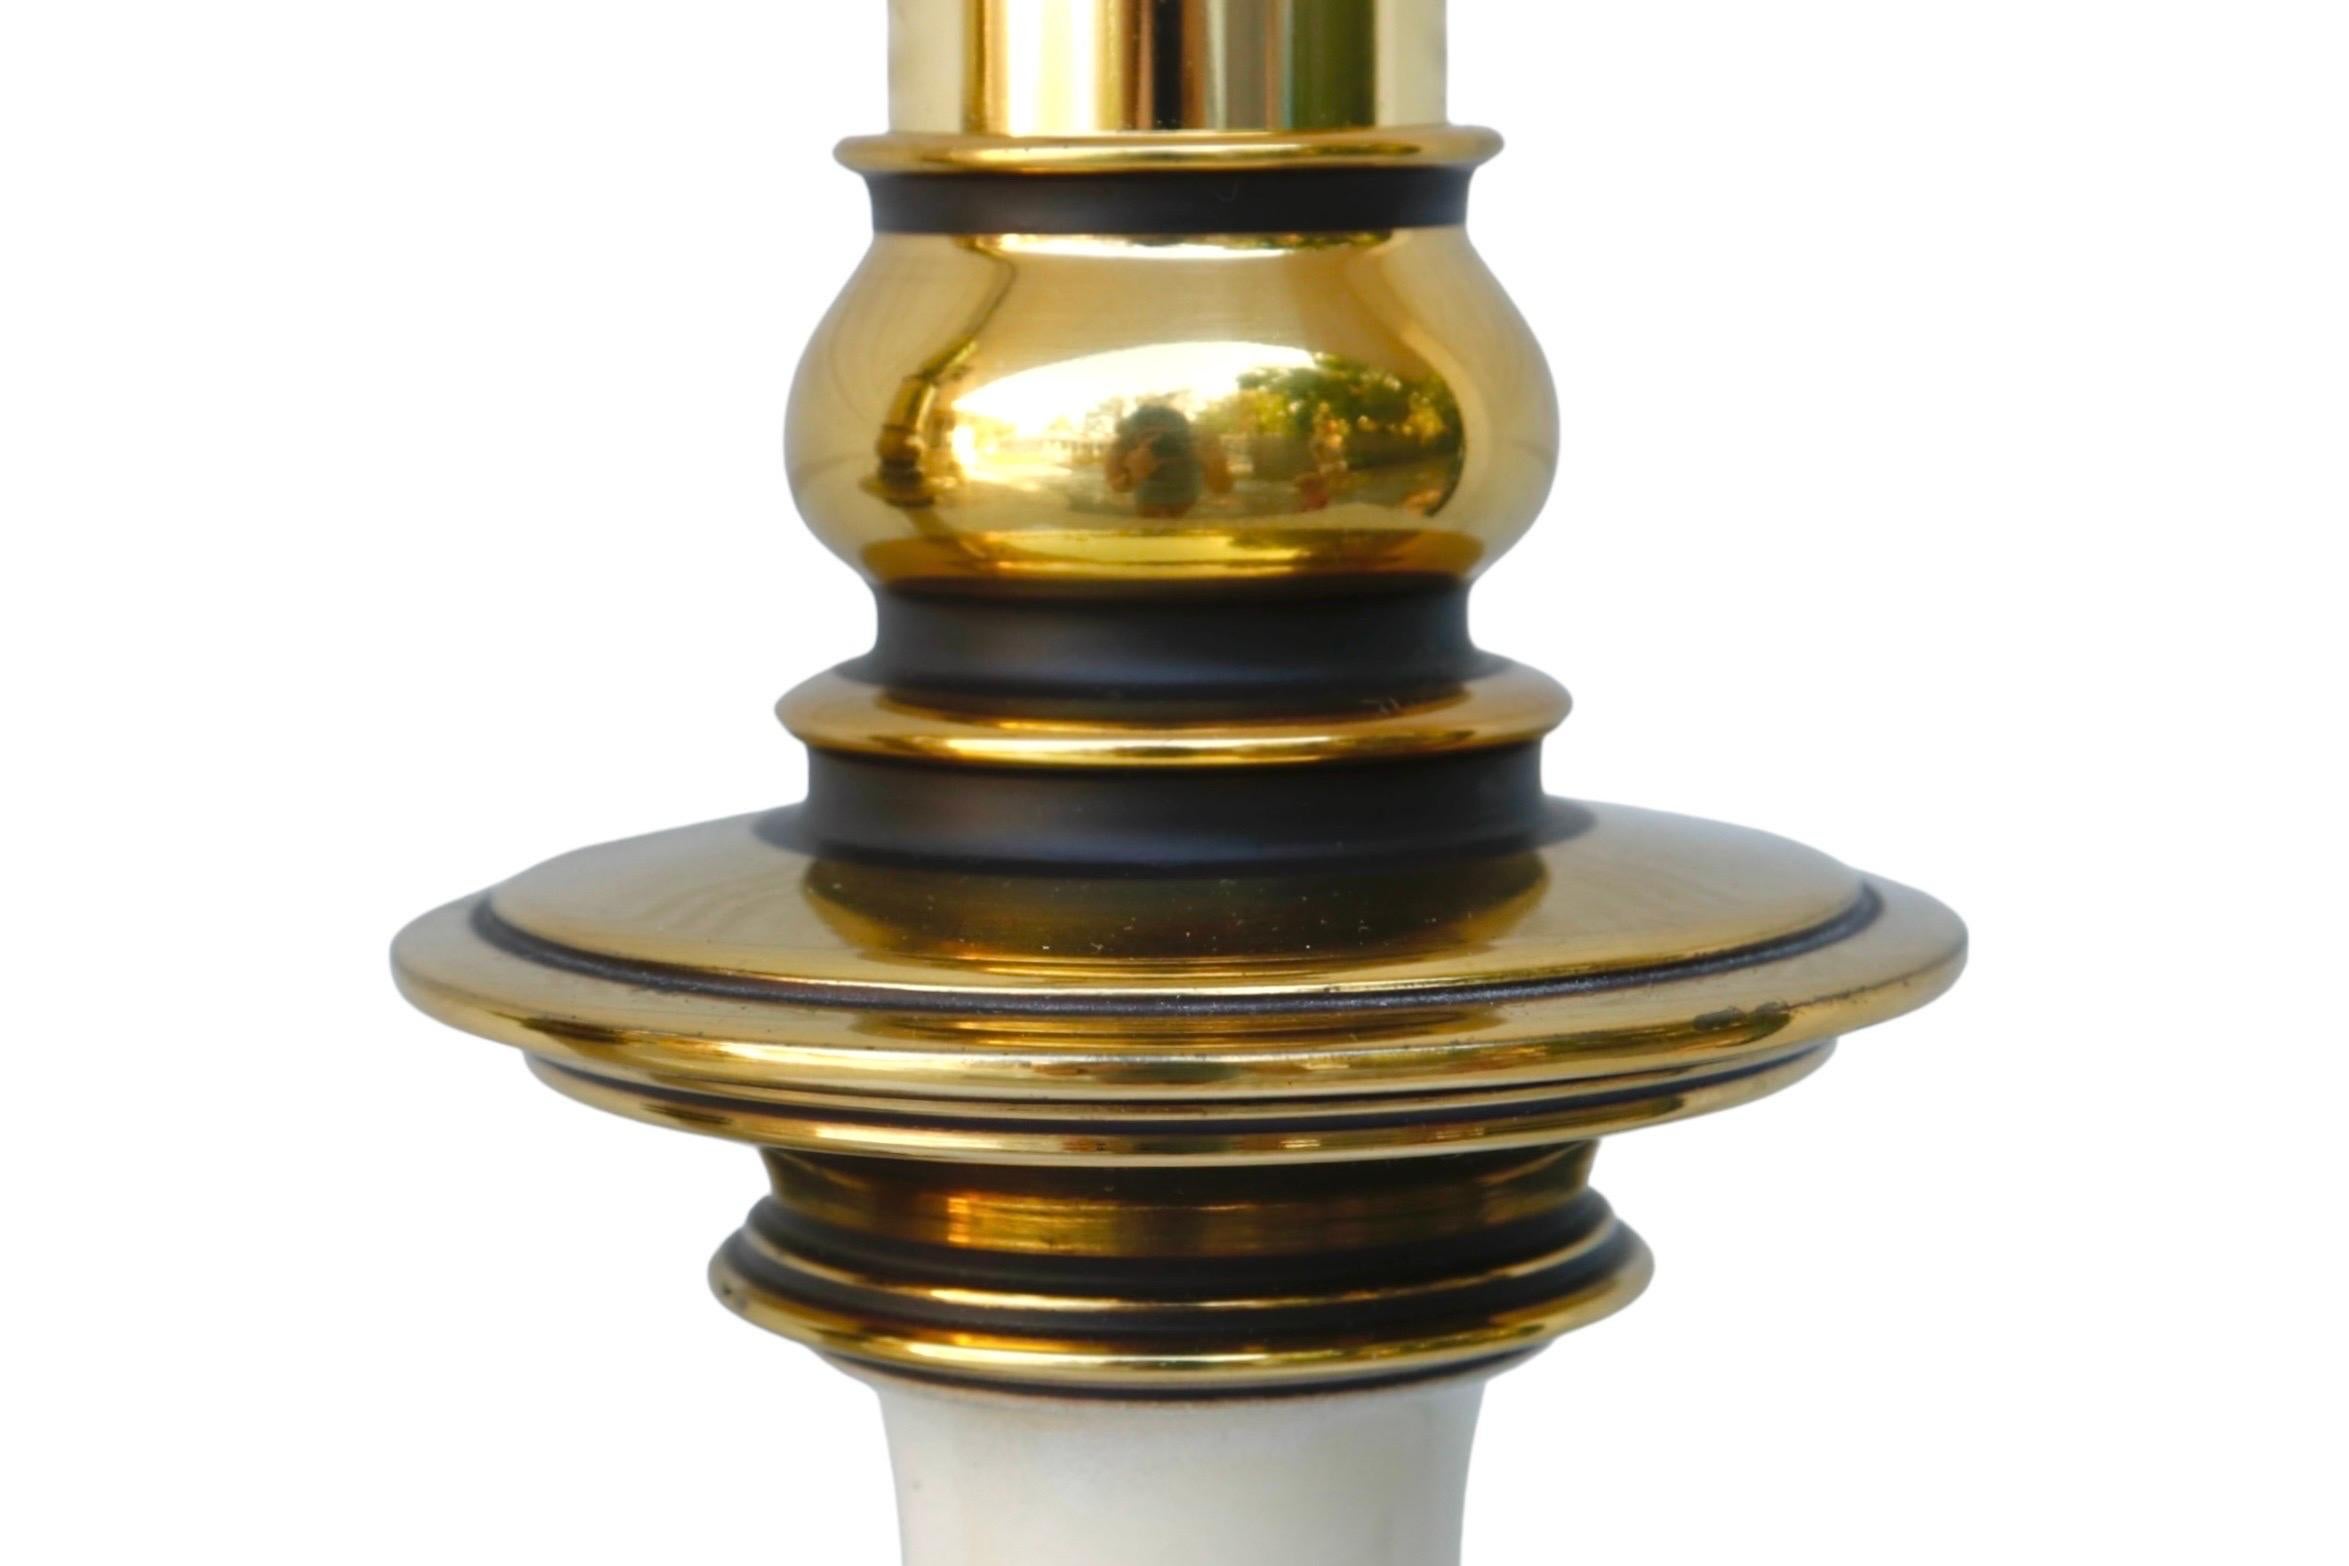 A pair of Regency style baluster shaped table lamps in gold and white by Stiffel. Bright gold colored brass is turned with a central white enameled vase. Each lamp measures 16.5